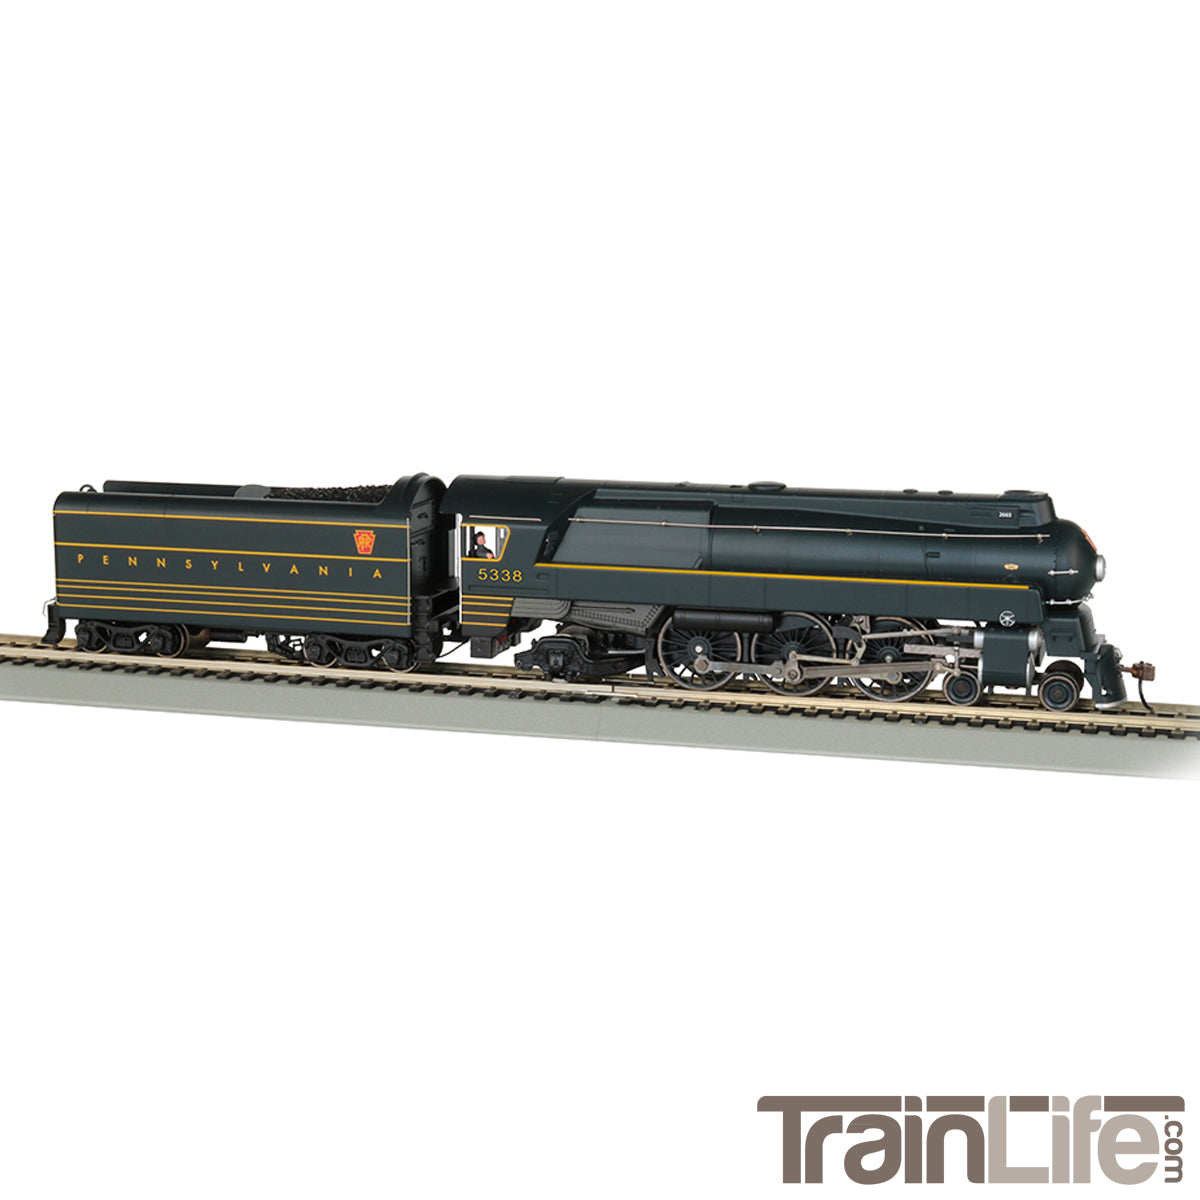 ho scale dcc locomotives with sound